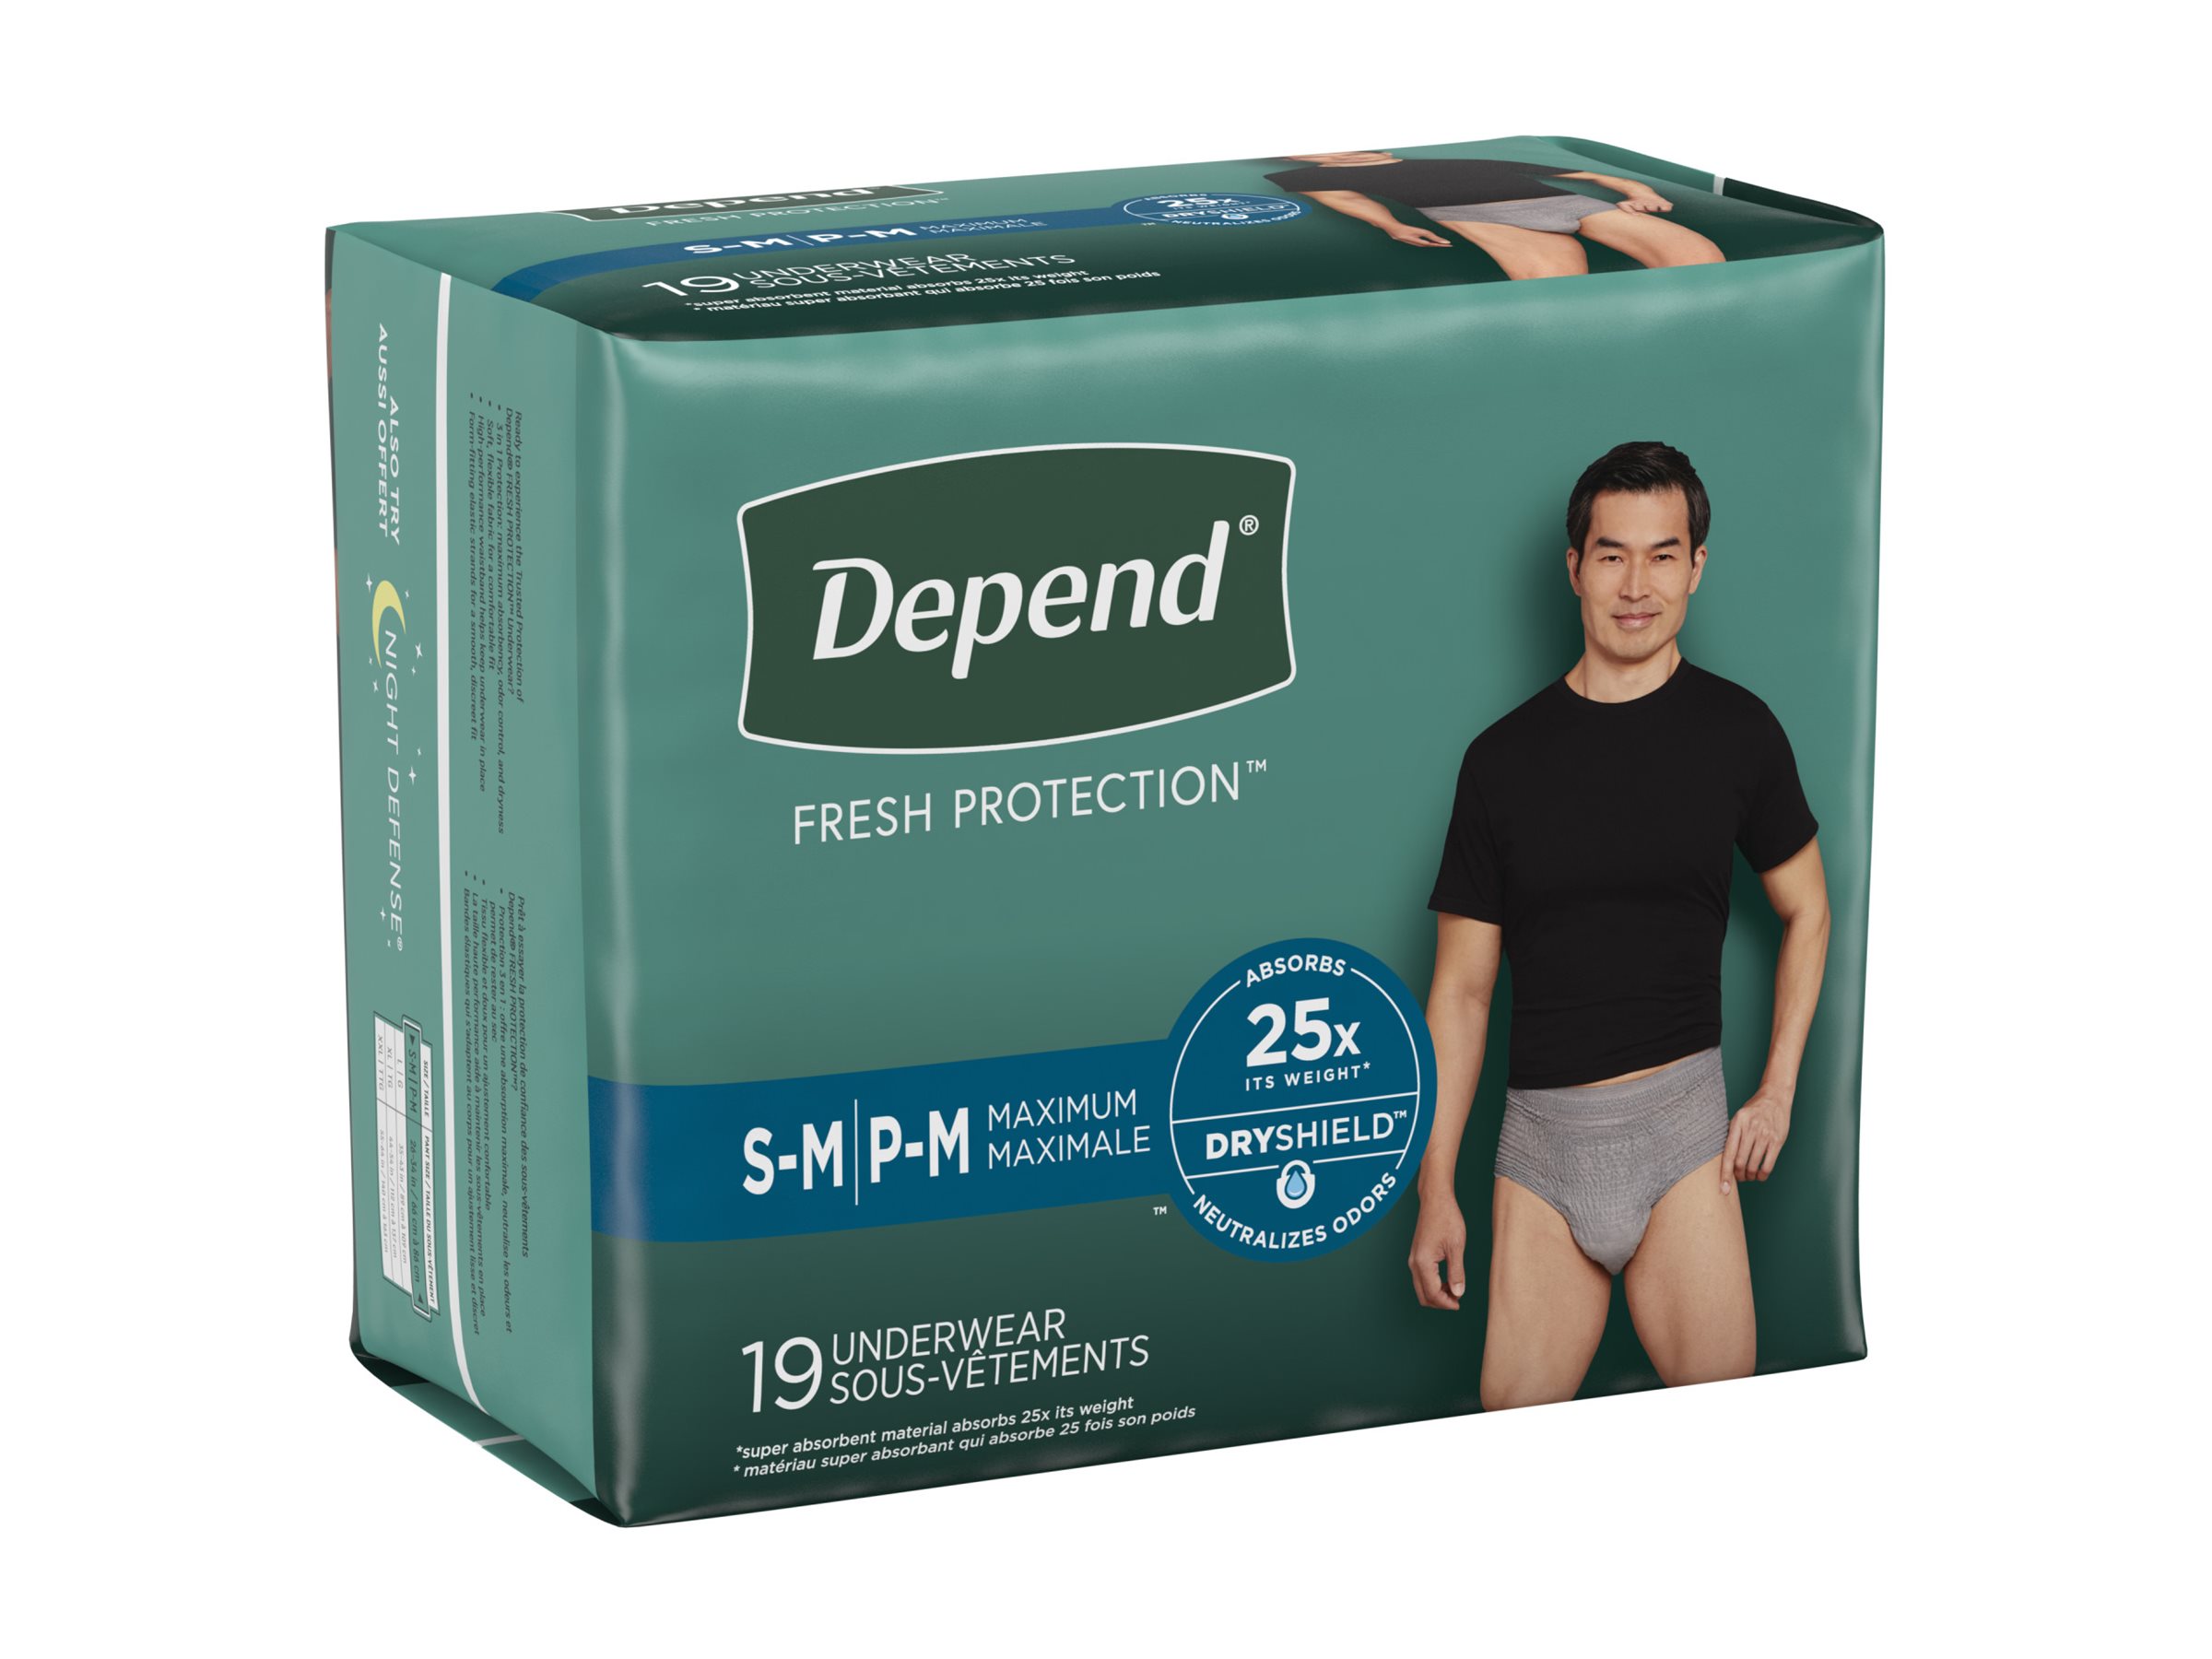 Depend Fresh Protection Incontinence Underwear for Men - Maximum